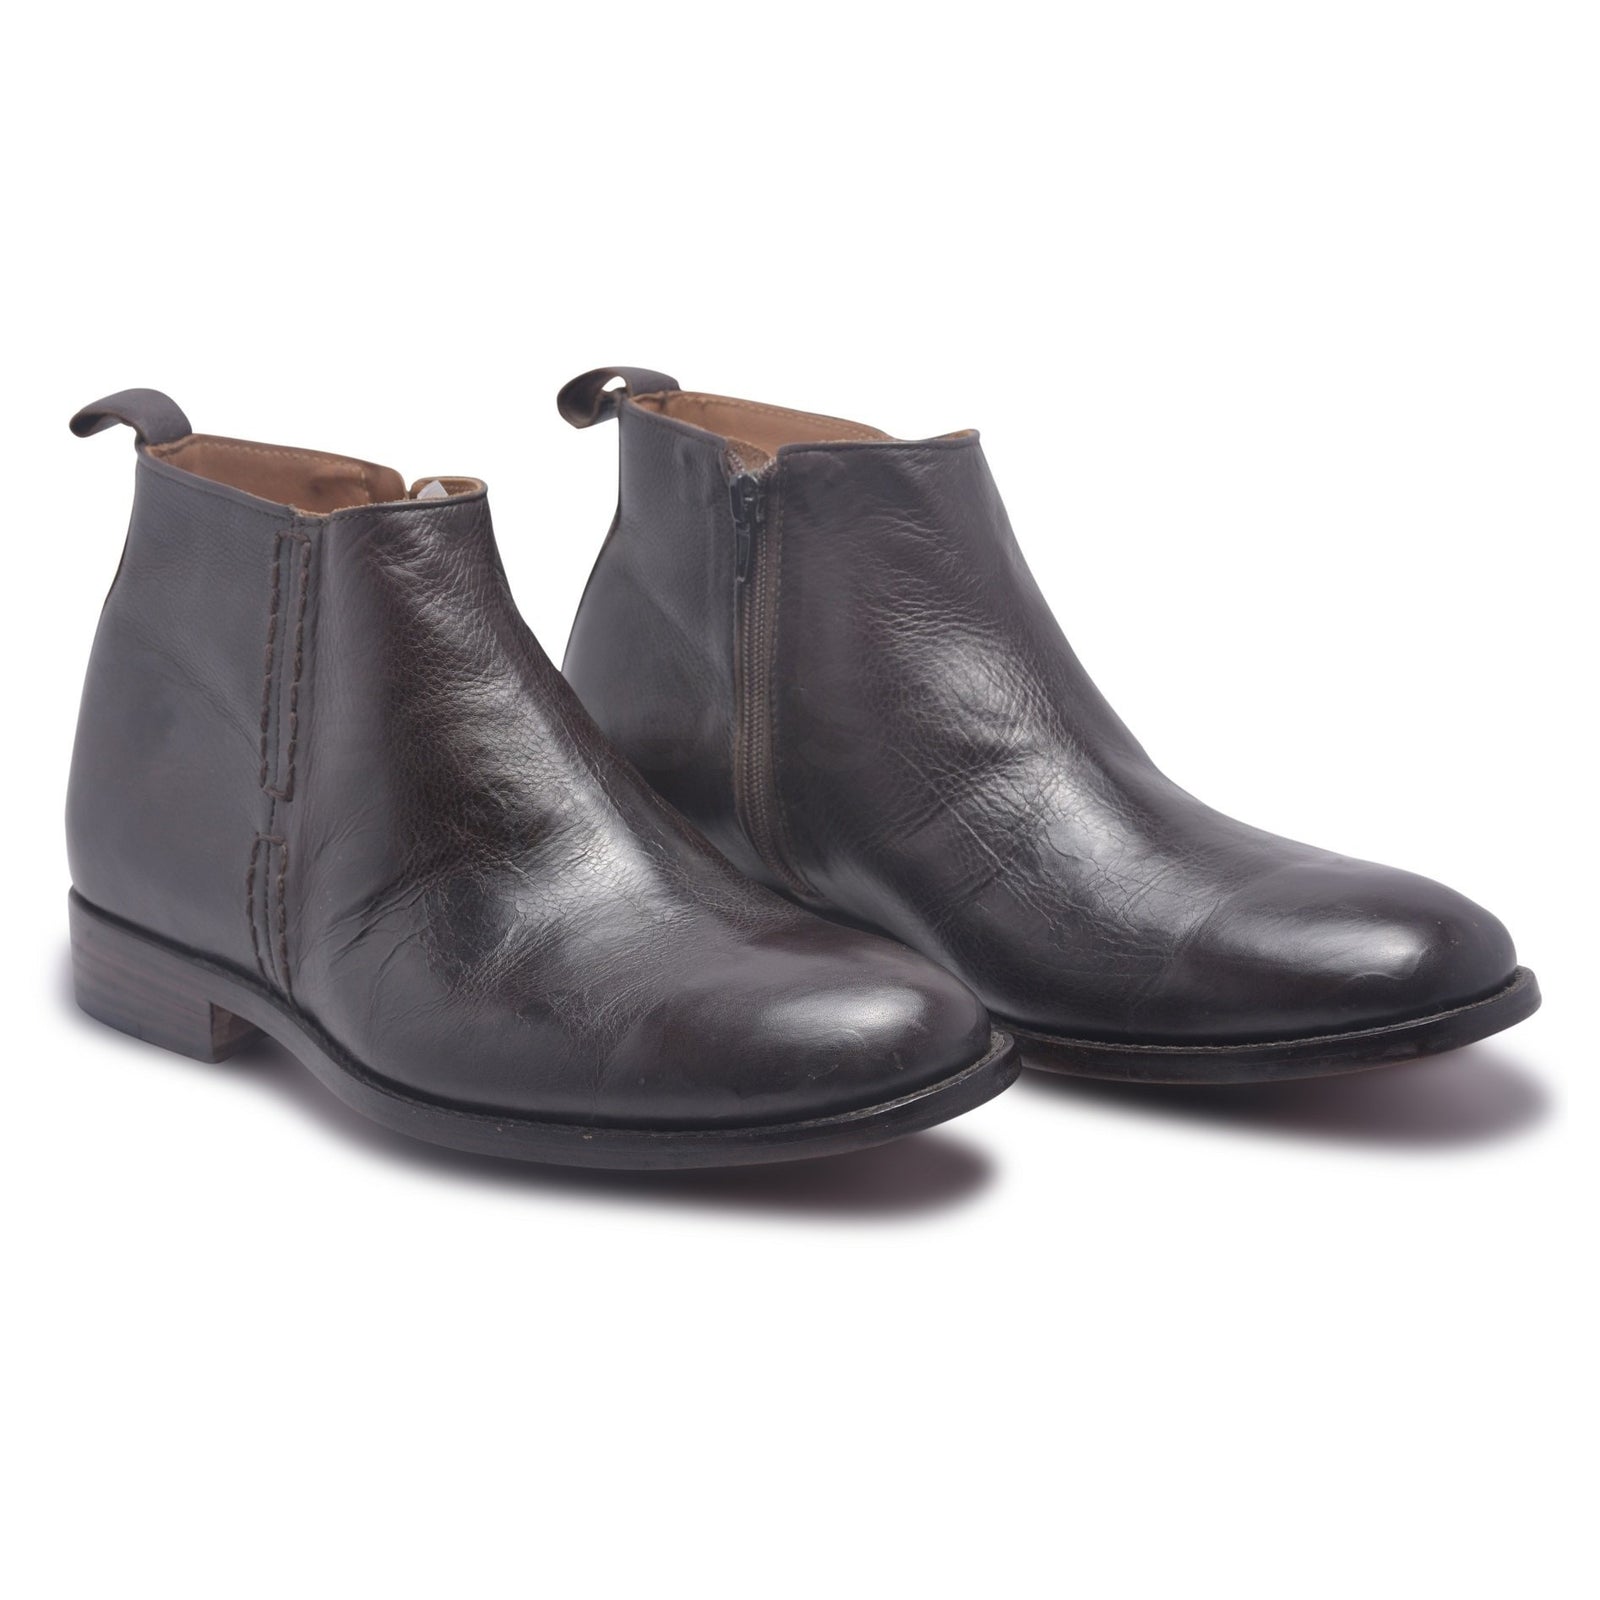 Stylish Zipper Boots for Men - Leather 